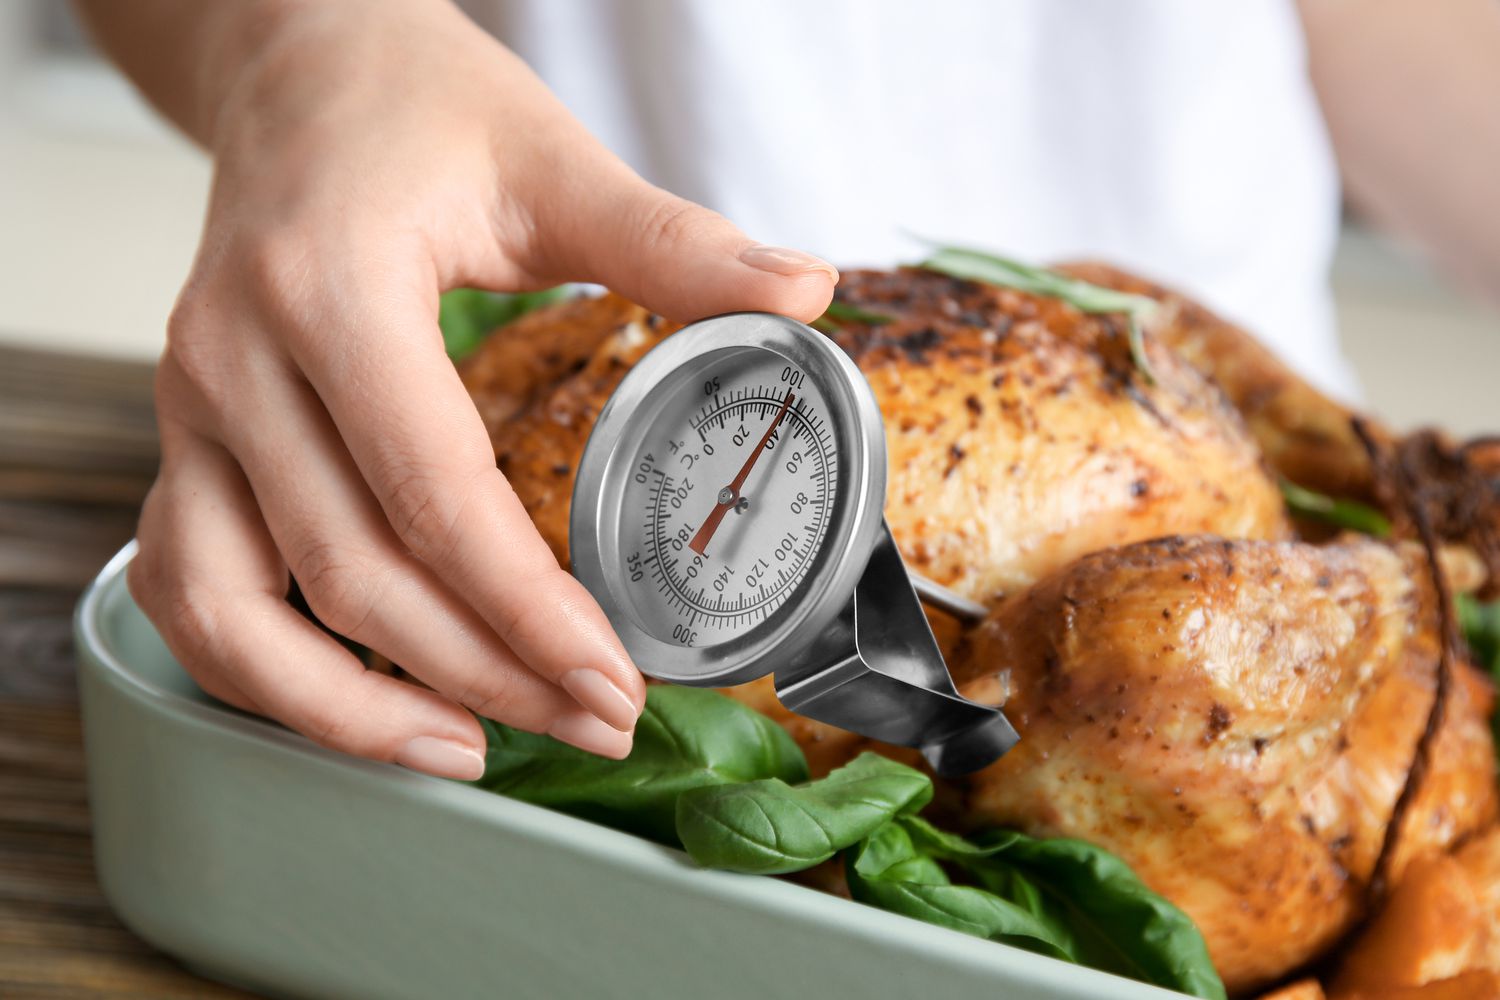 Top Cooking Thermometer Review: Accurate and Reliable